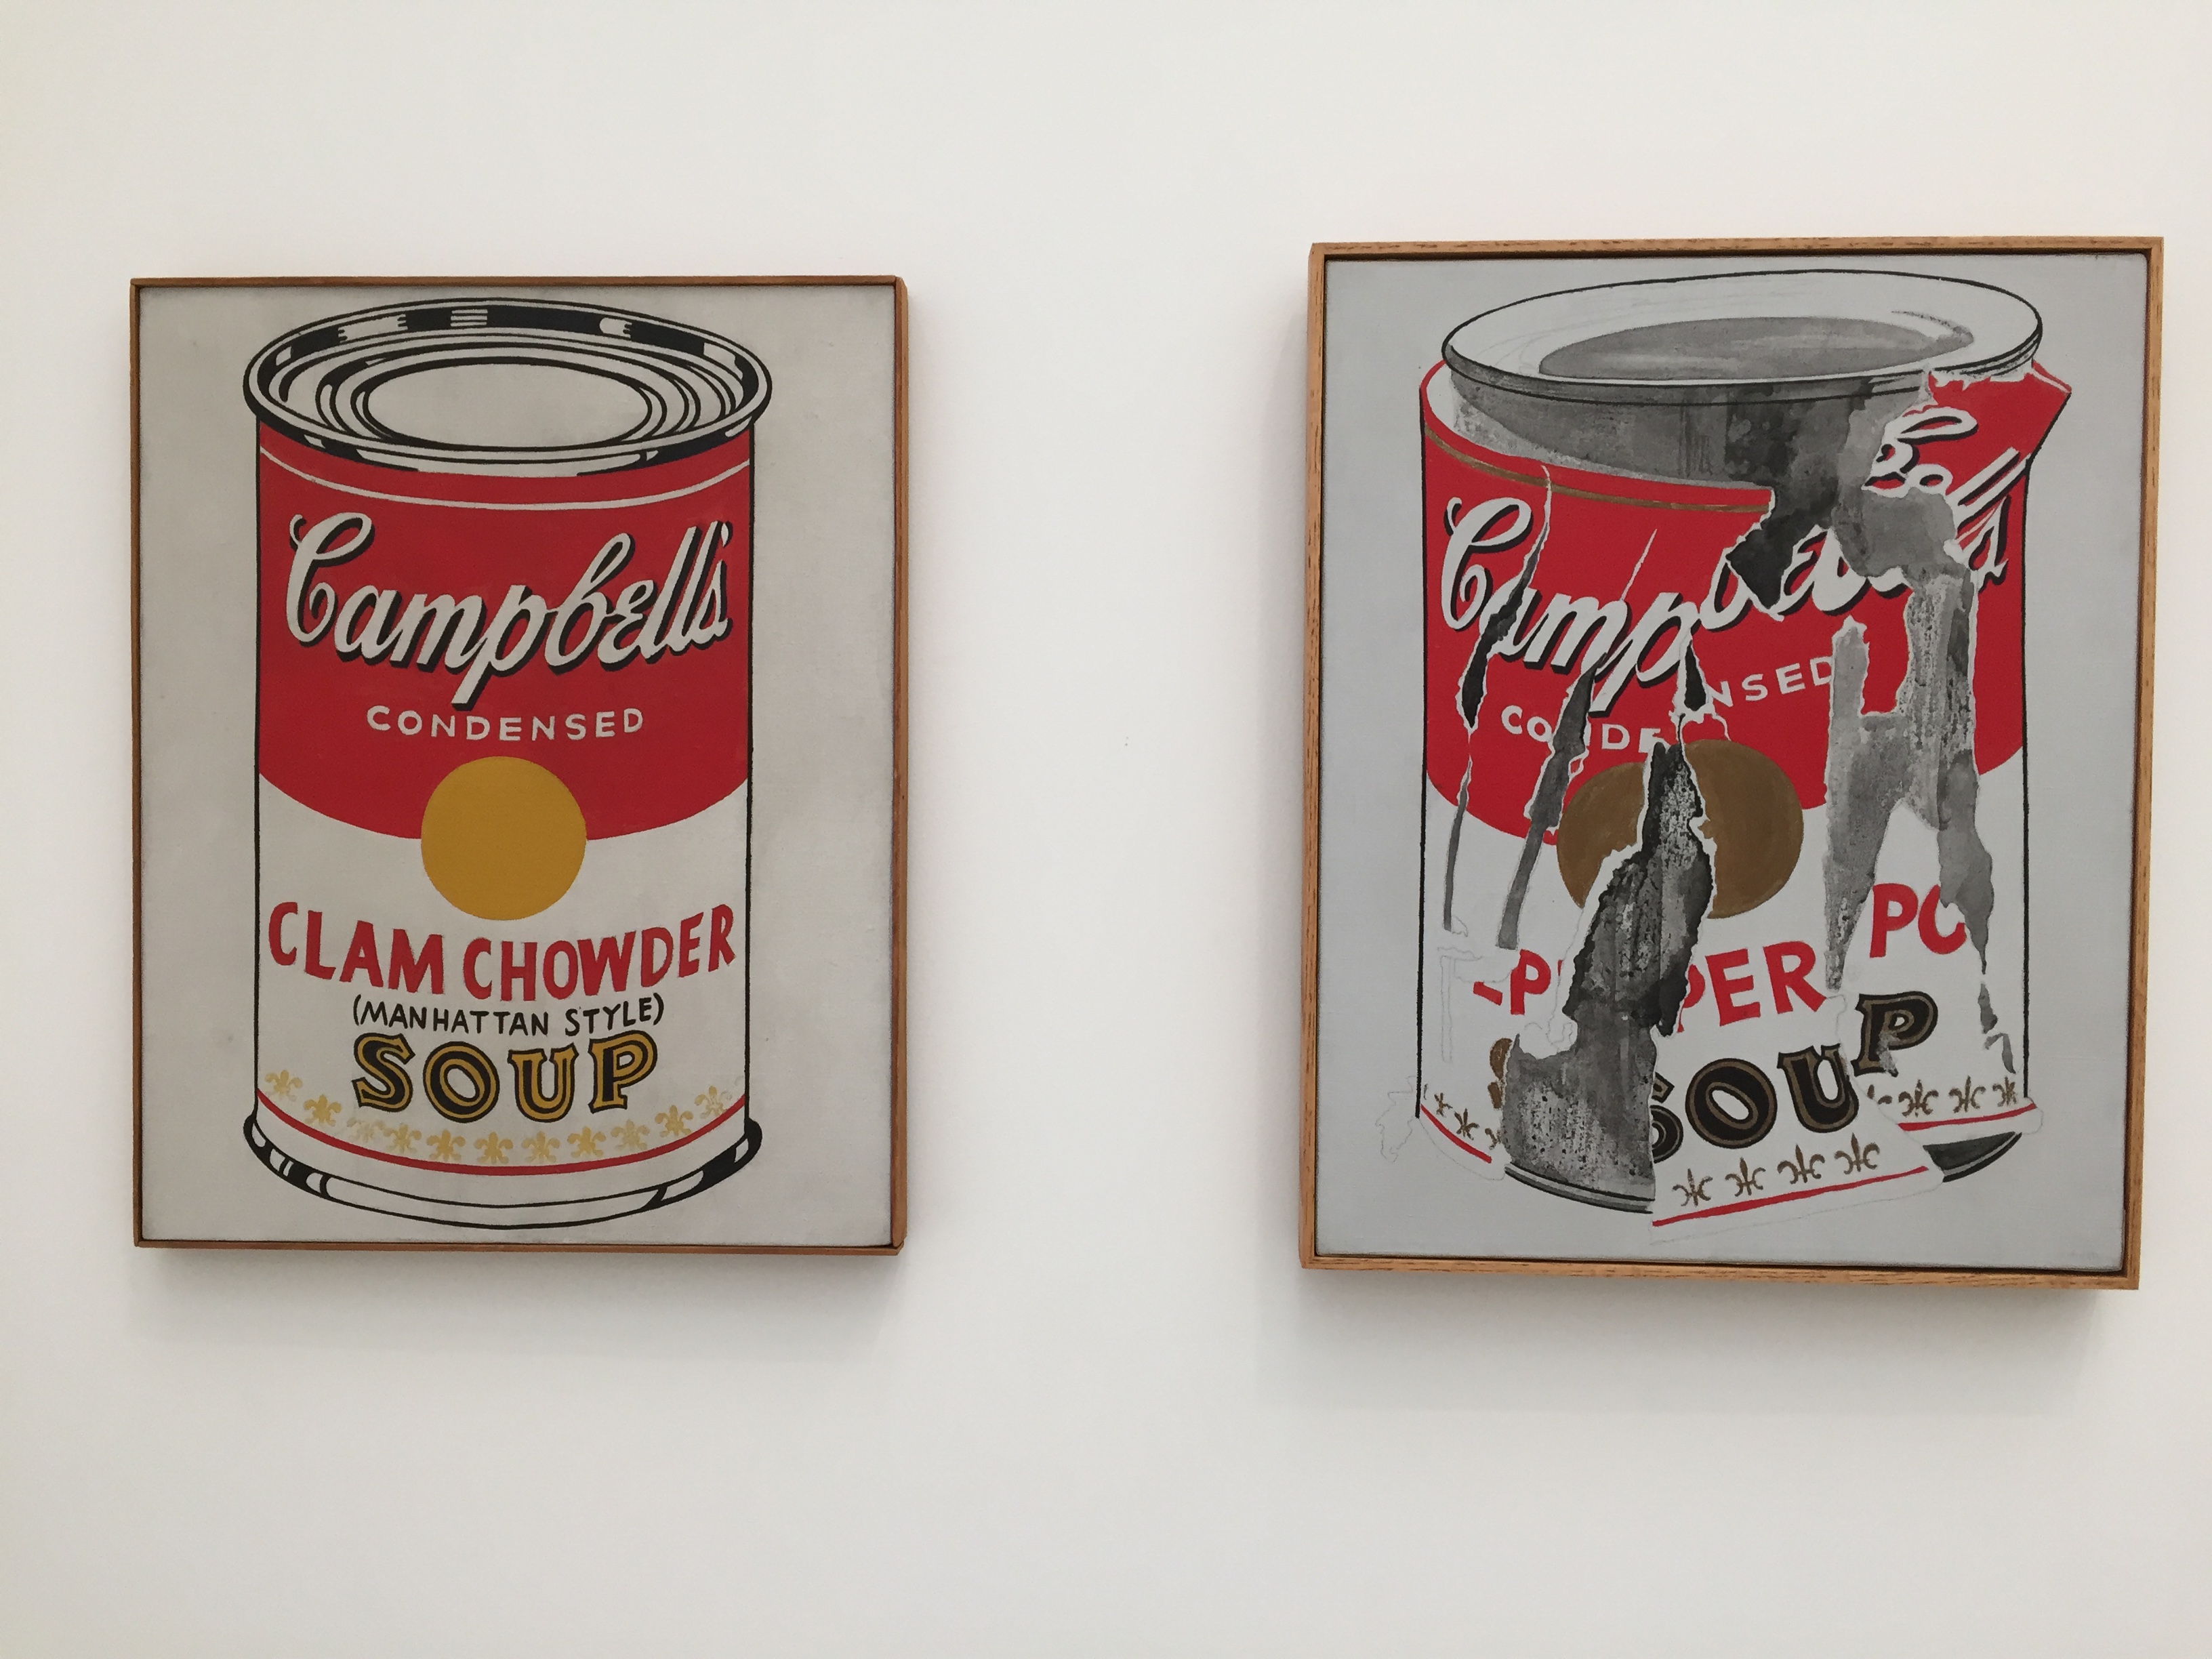 Andy Warhol artwork, The Broad in Downtown LA